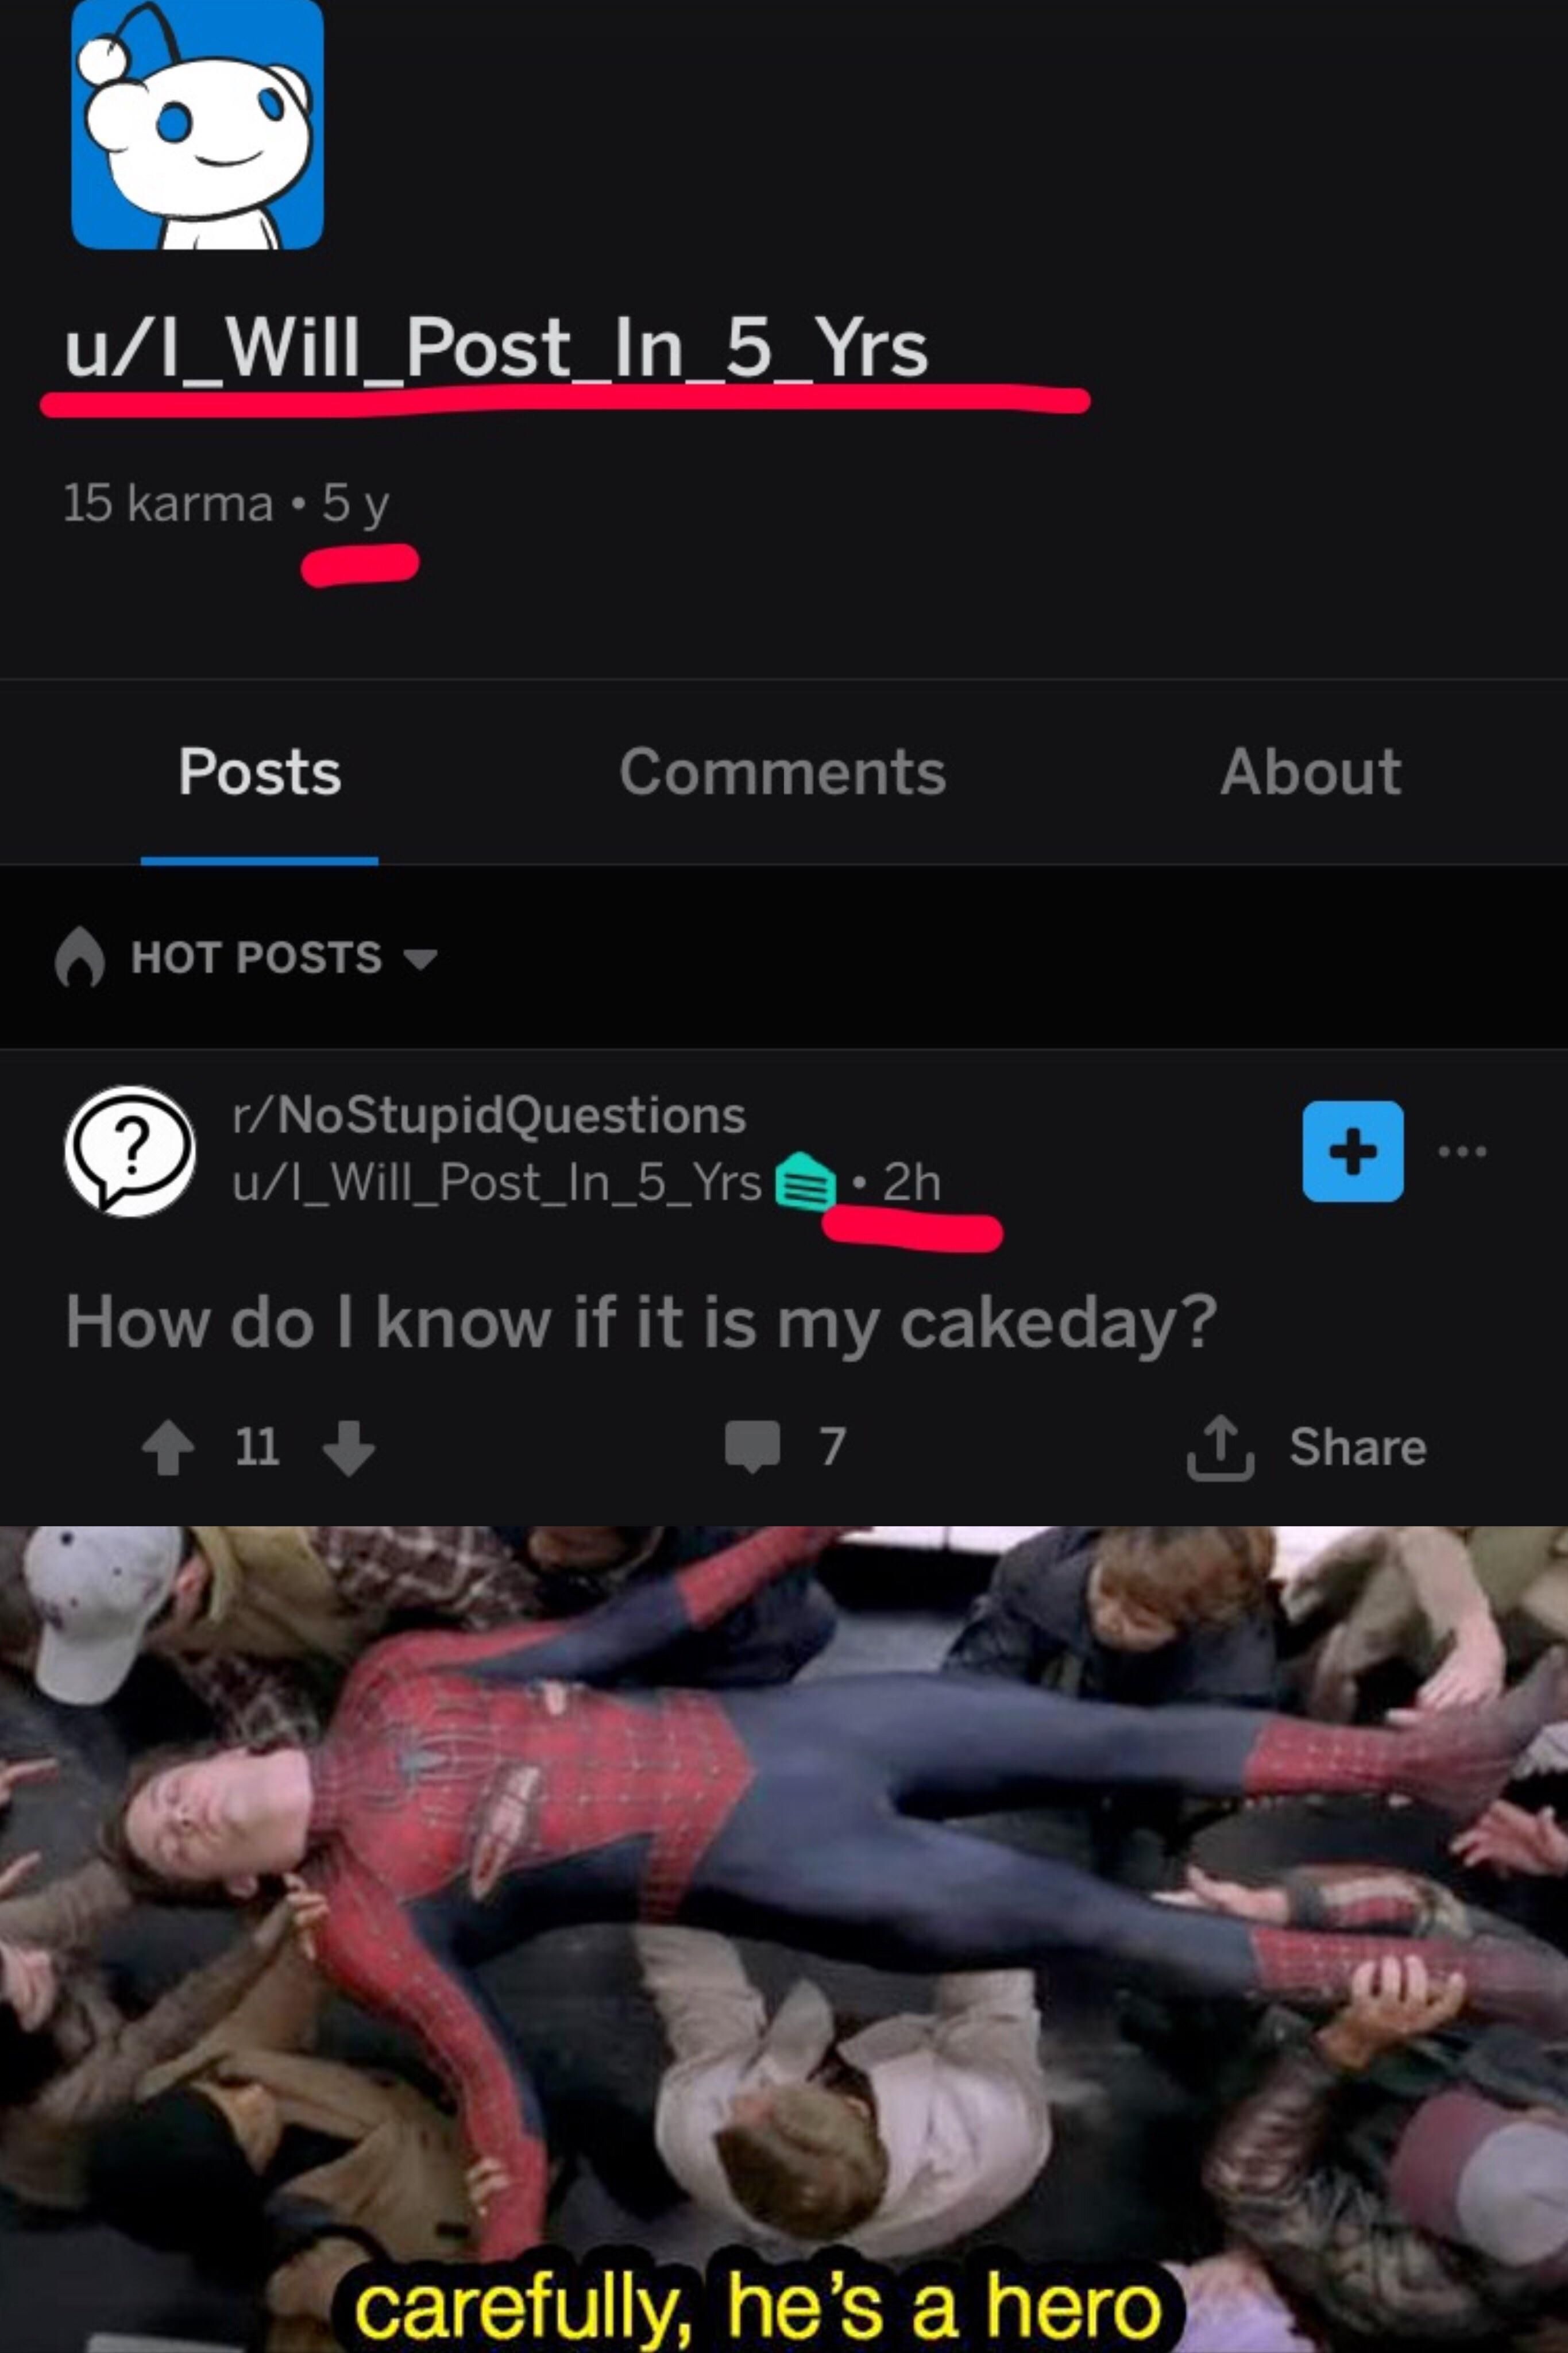 This guy made an account called I will post in 5 years, exactly 5 years ago. 5 years later he has finally made his first ever post!